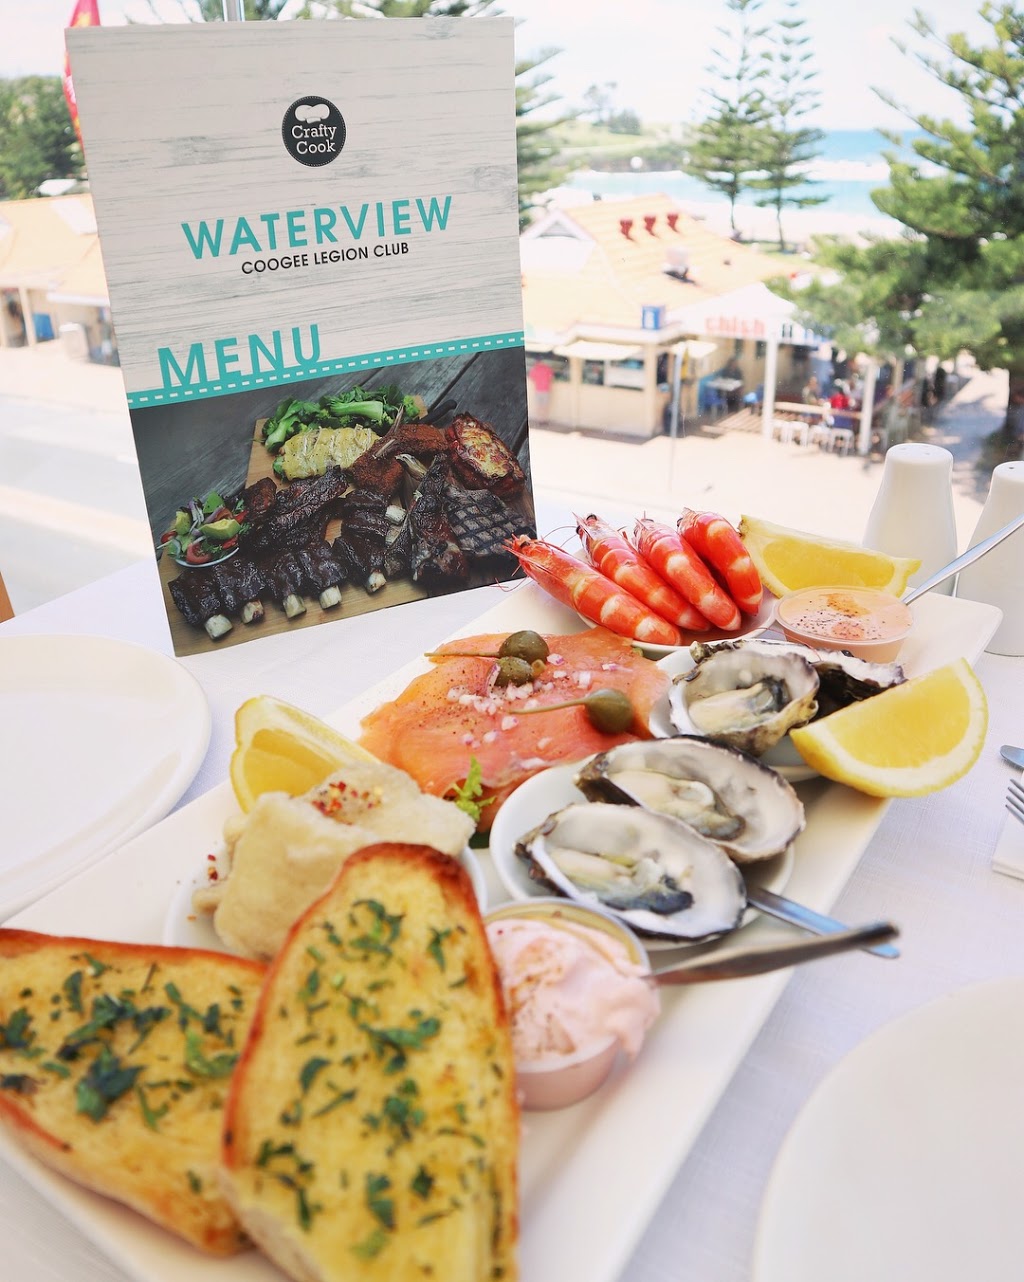 Waterview by Crafty Cook | restaurant | 200 Arden St, Coogee NSW 2034, Australia | 0296655151 OR +61 2 9665 5151